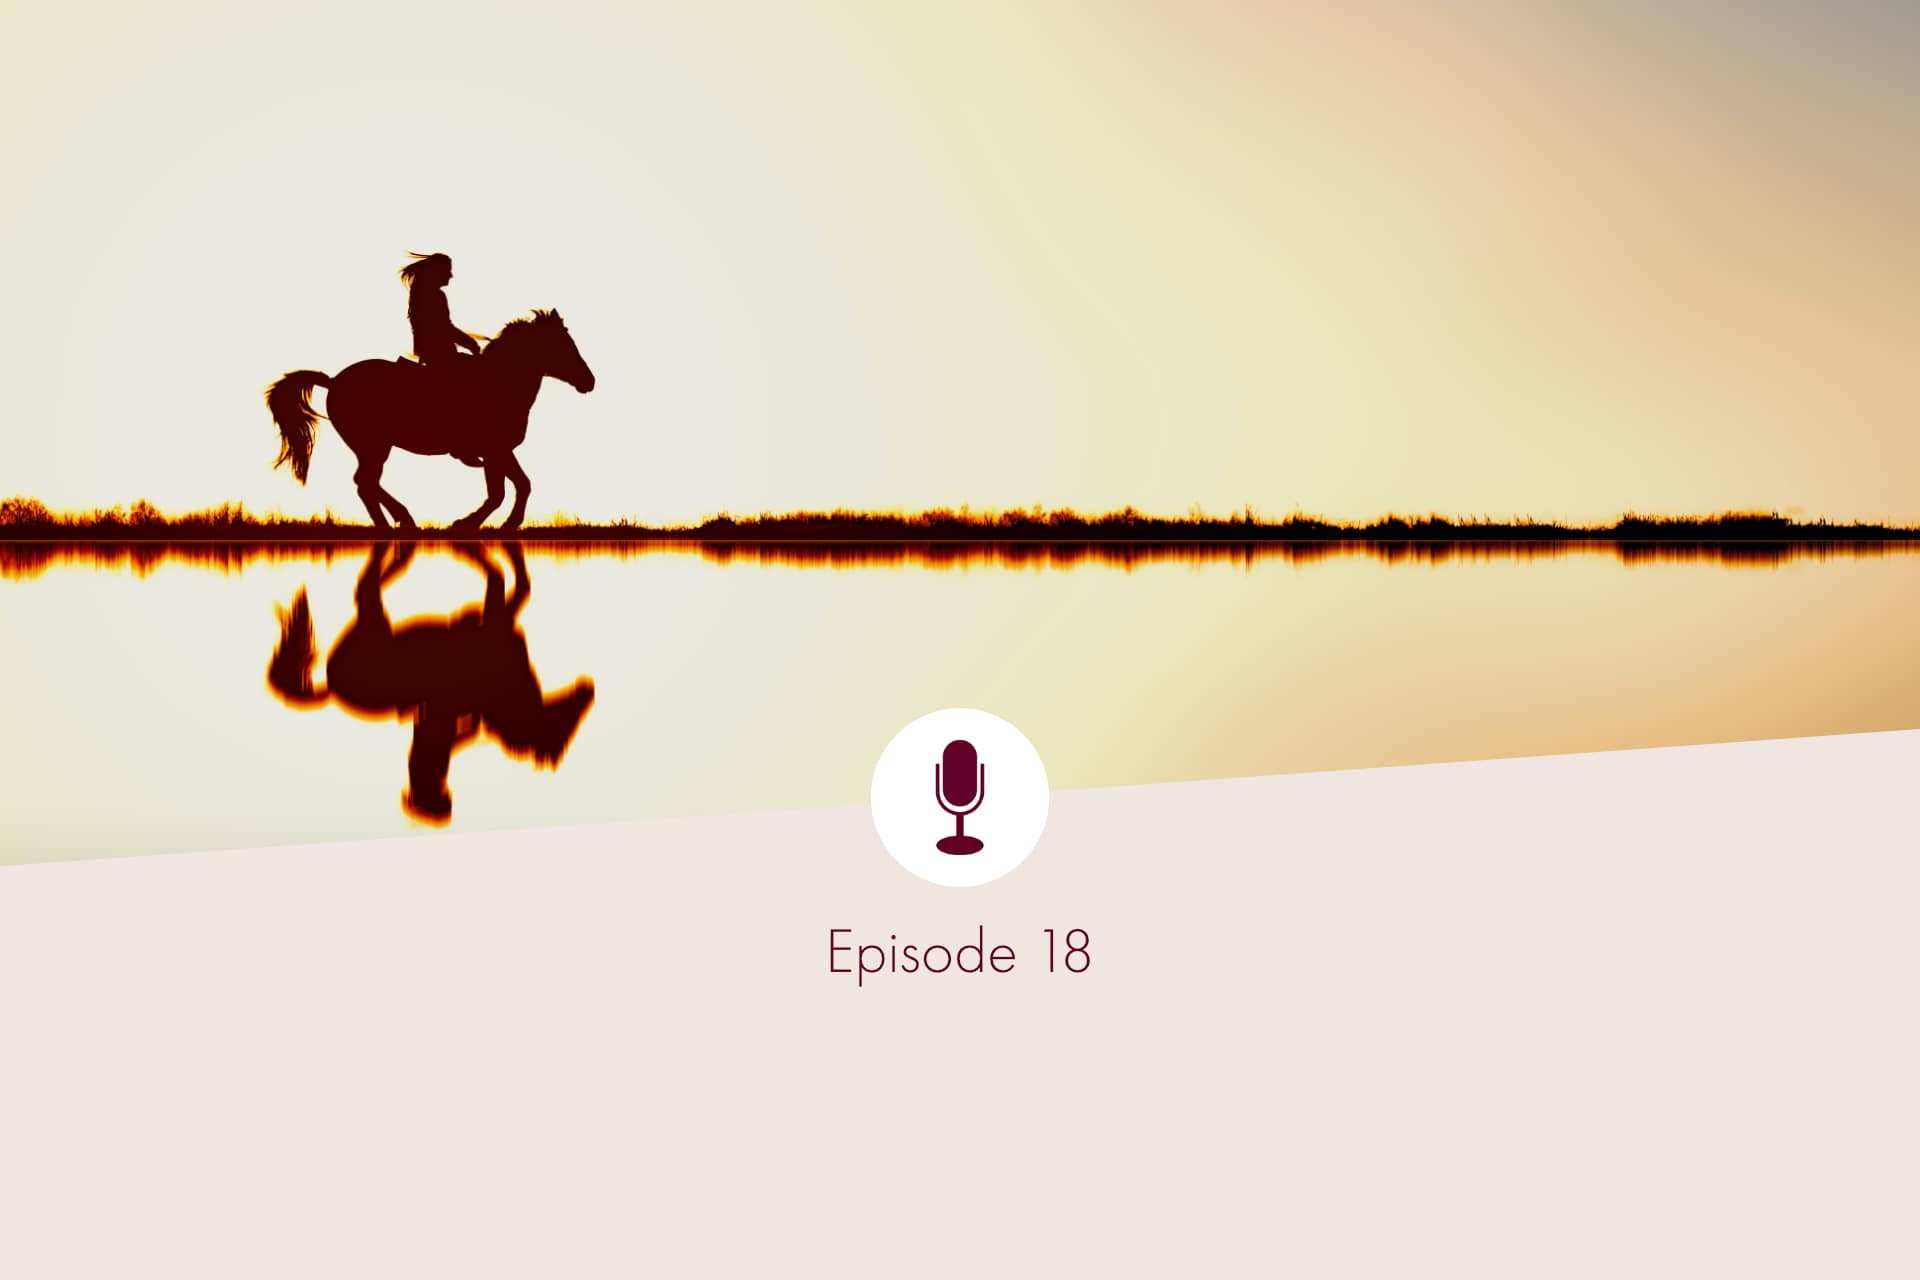 Picture of a person riding a horse in the sunset